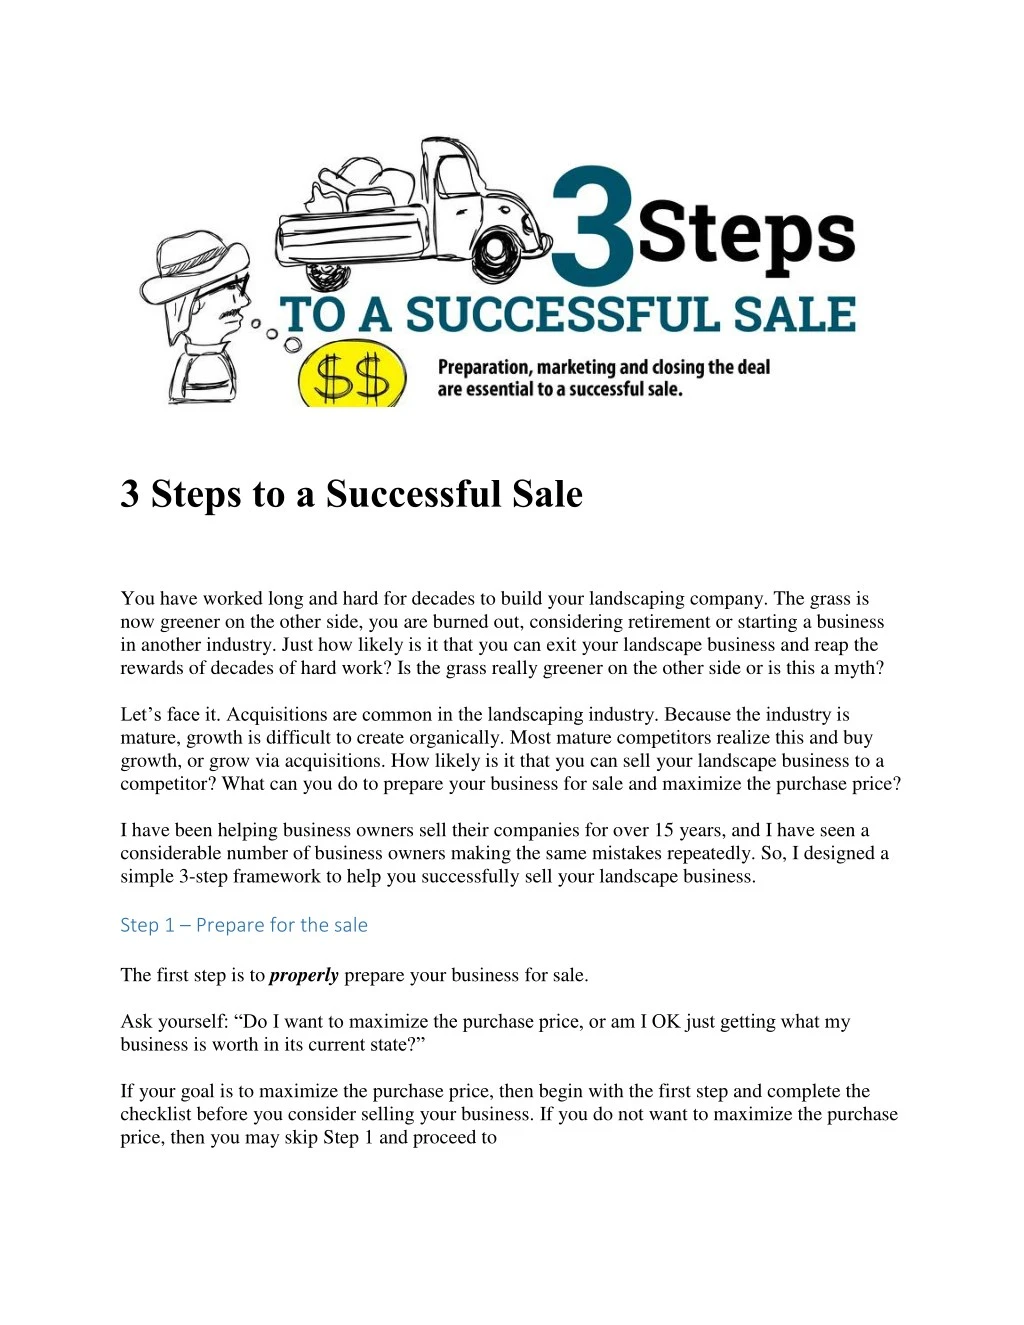 3 steps to a successful sale